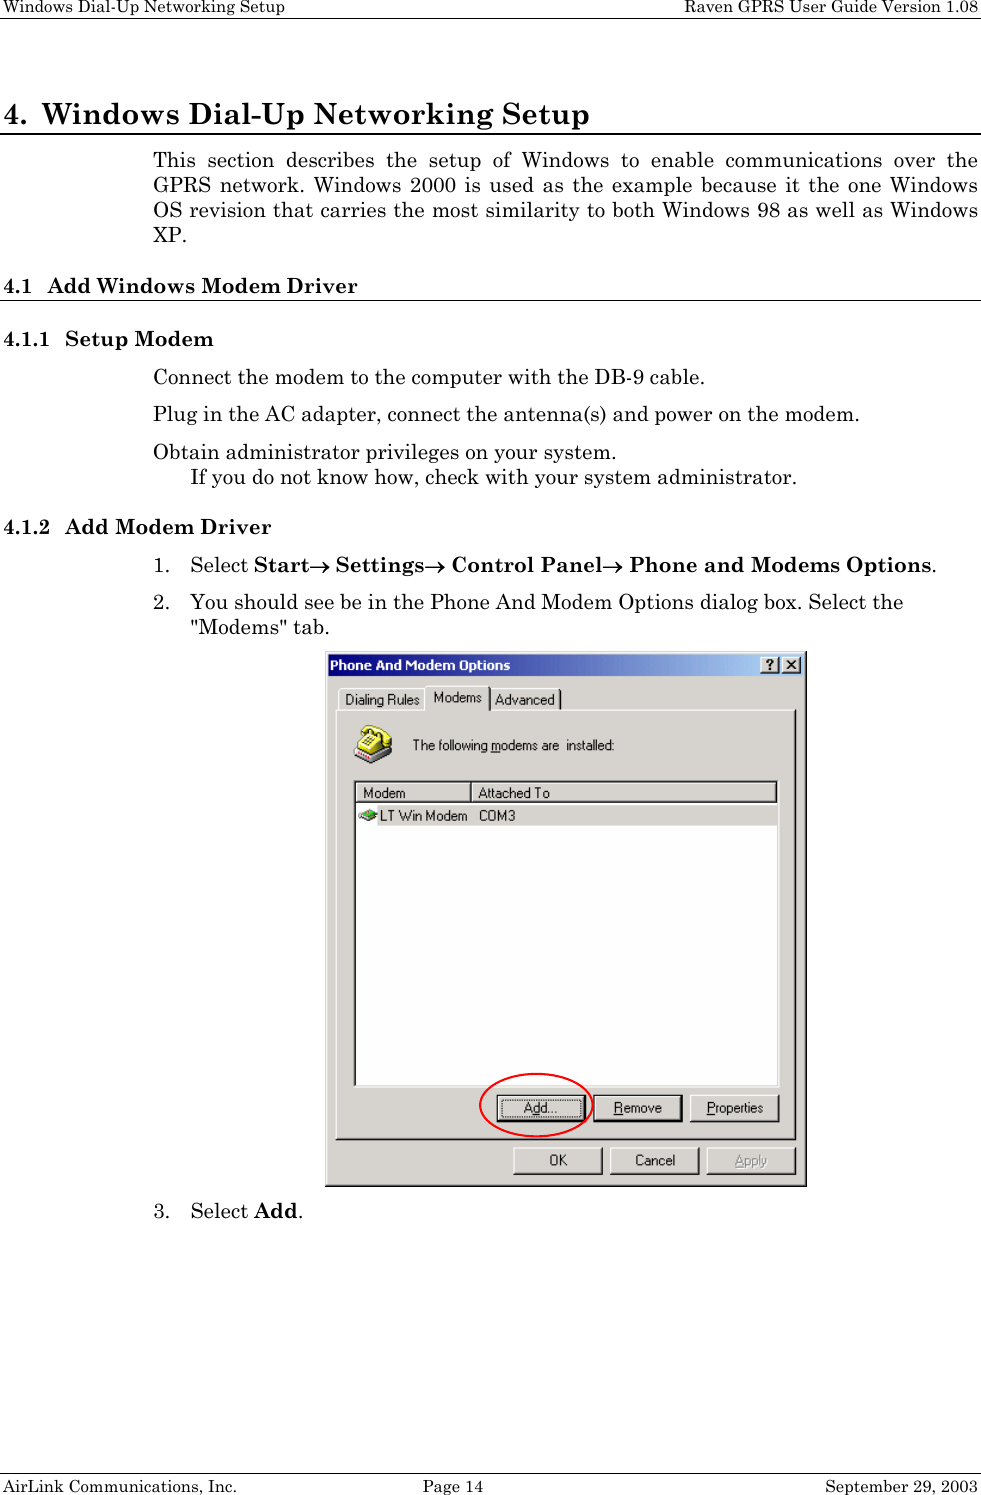 Windows Dial-Up Networking Setup    Raven GPRS User Guide Version 1.08 AirLink Communications, Inc.  Page 14  September 29, 2003 4. Windows Dial-Up Networking Setup This section describes the setup of Windows to enable communications over the GPRS network. Windows 2000 is used as the example because it the one Windows OS revision that carries the most similarity to both Windows 98 as well as Windows XP. 4.1 Add Windows Modem Driver 4.1.1 Setup Modem Connect the modem to the computer with the DB-9 cable. Plug in the AC adapter, connect the antenna(s) and power on the modem. Obtain administrator privileges on your system.  If you do not know how, check with your system administrator. 4.1.2 Add Modem Driver 1. Select Start→ Settings→ Control Panel→ Phone and Modems Options. 2. You should see be in the Phone And Modem Options dialog box. Select the &quot;Modems&quot; tab.  3. Select Add. 